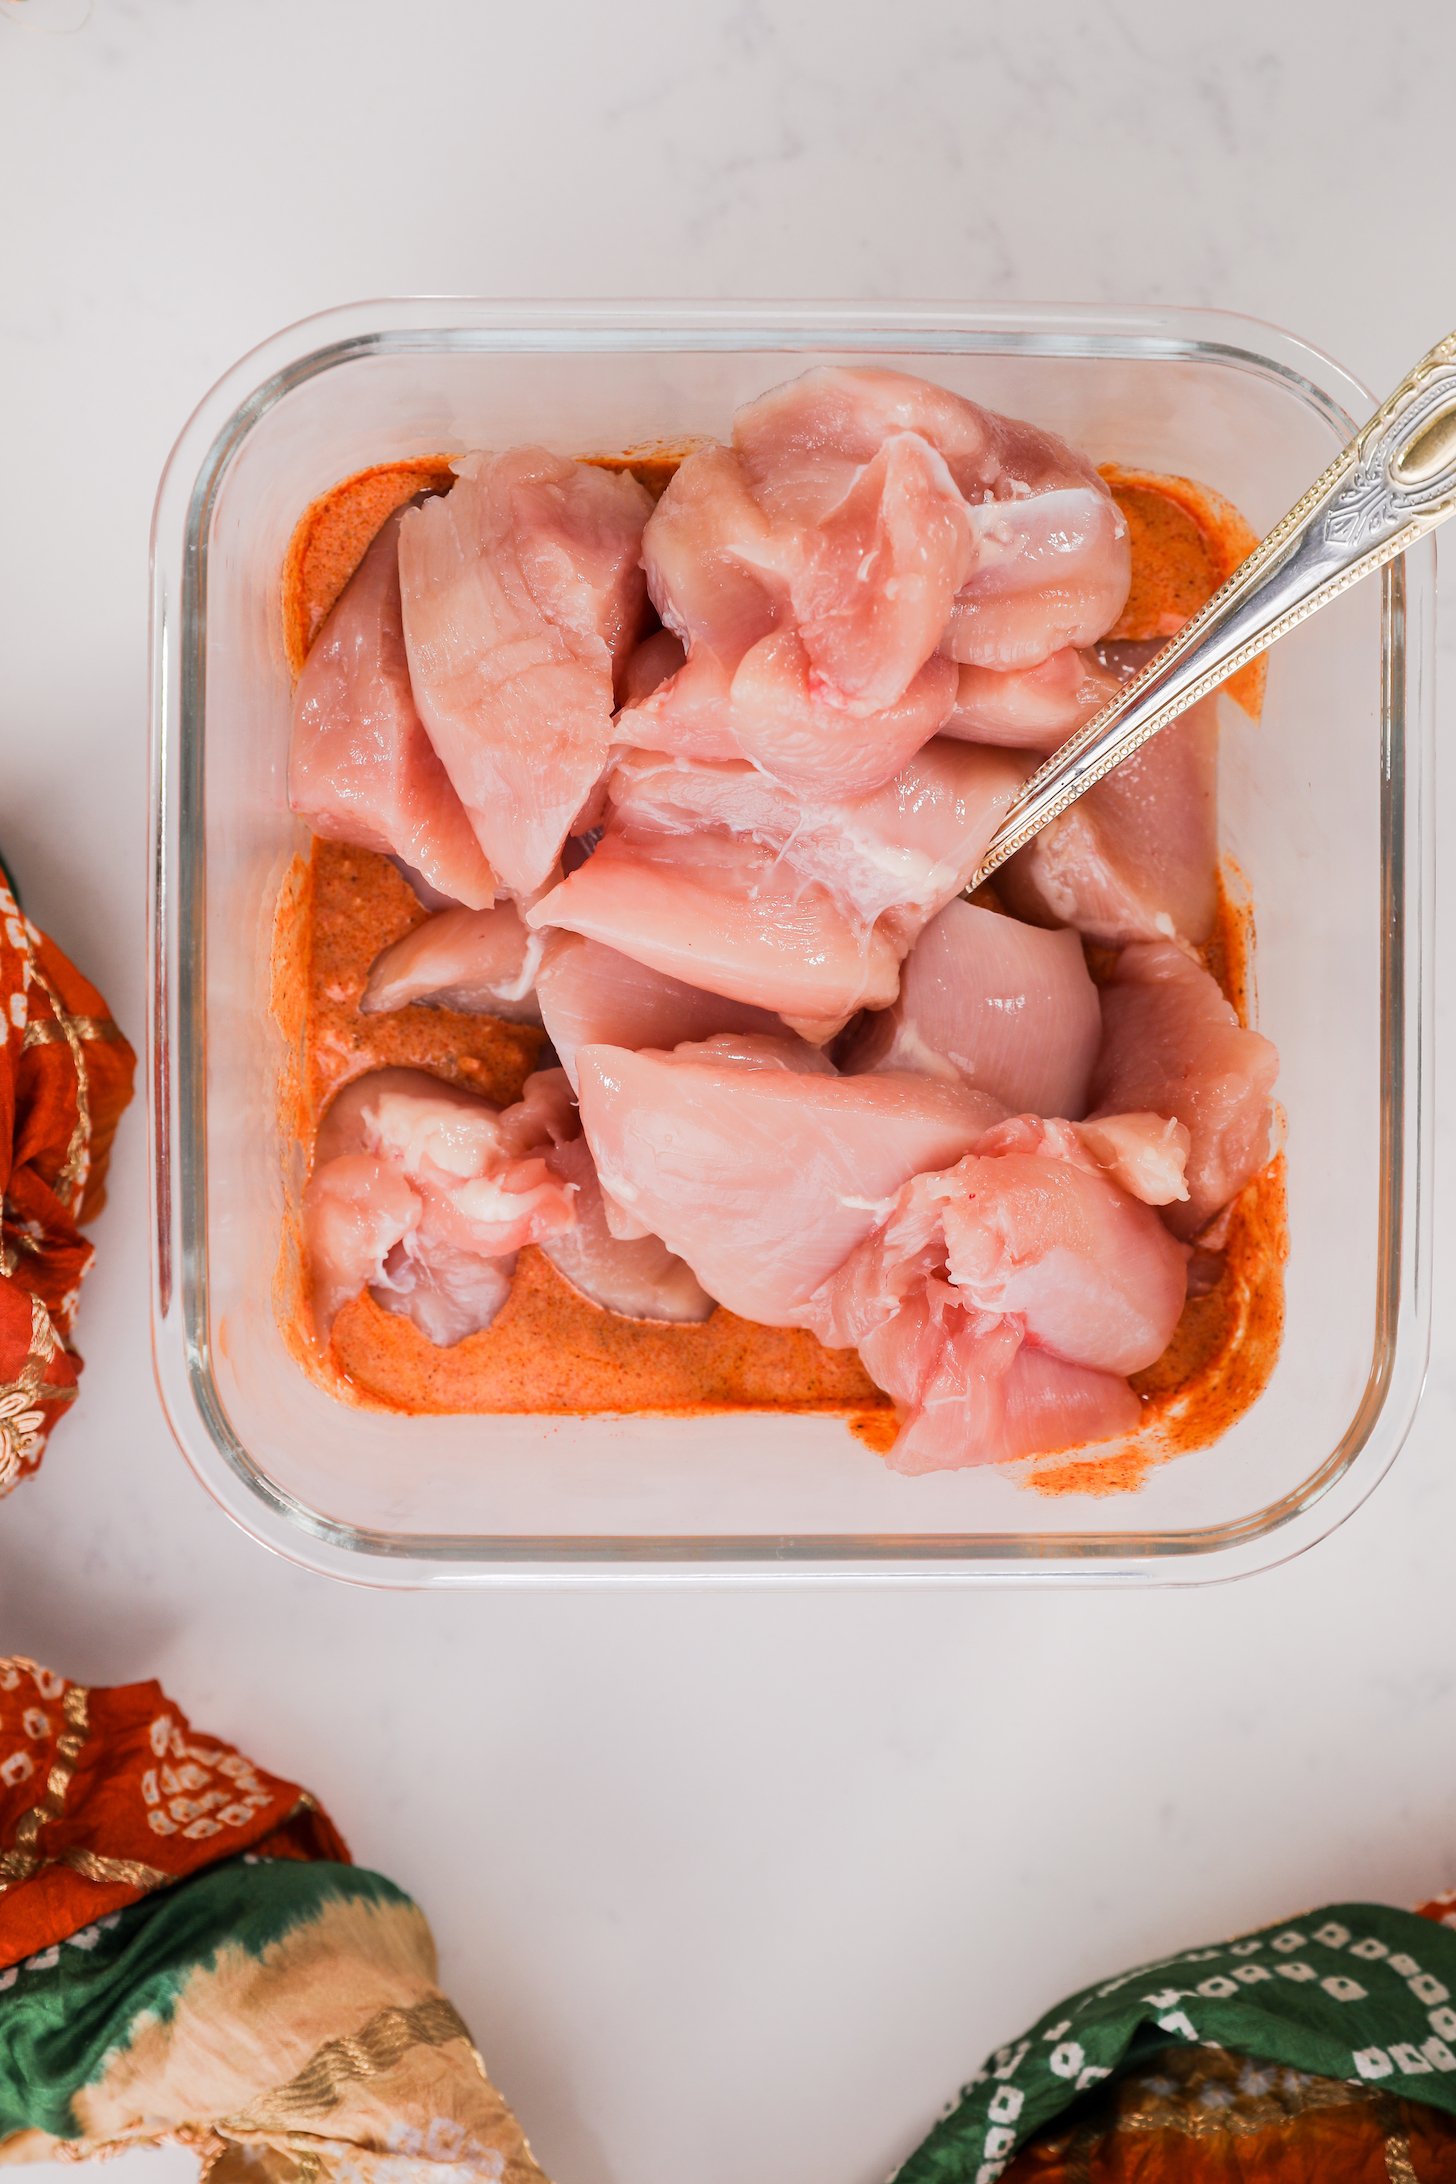 Chunks of chicken in a square glass container with an orange sauce.